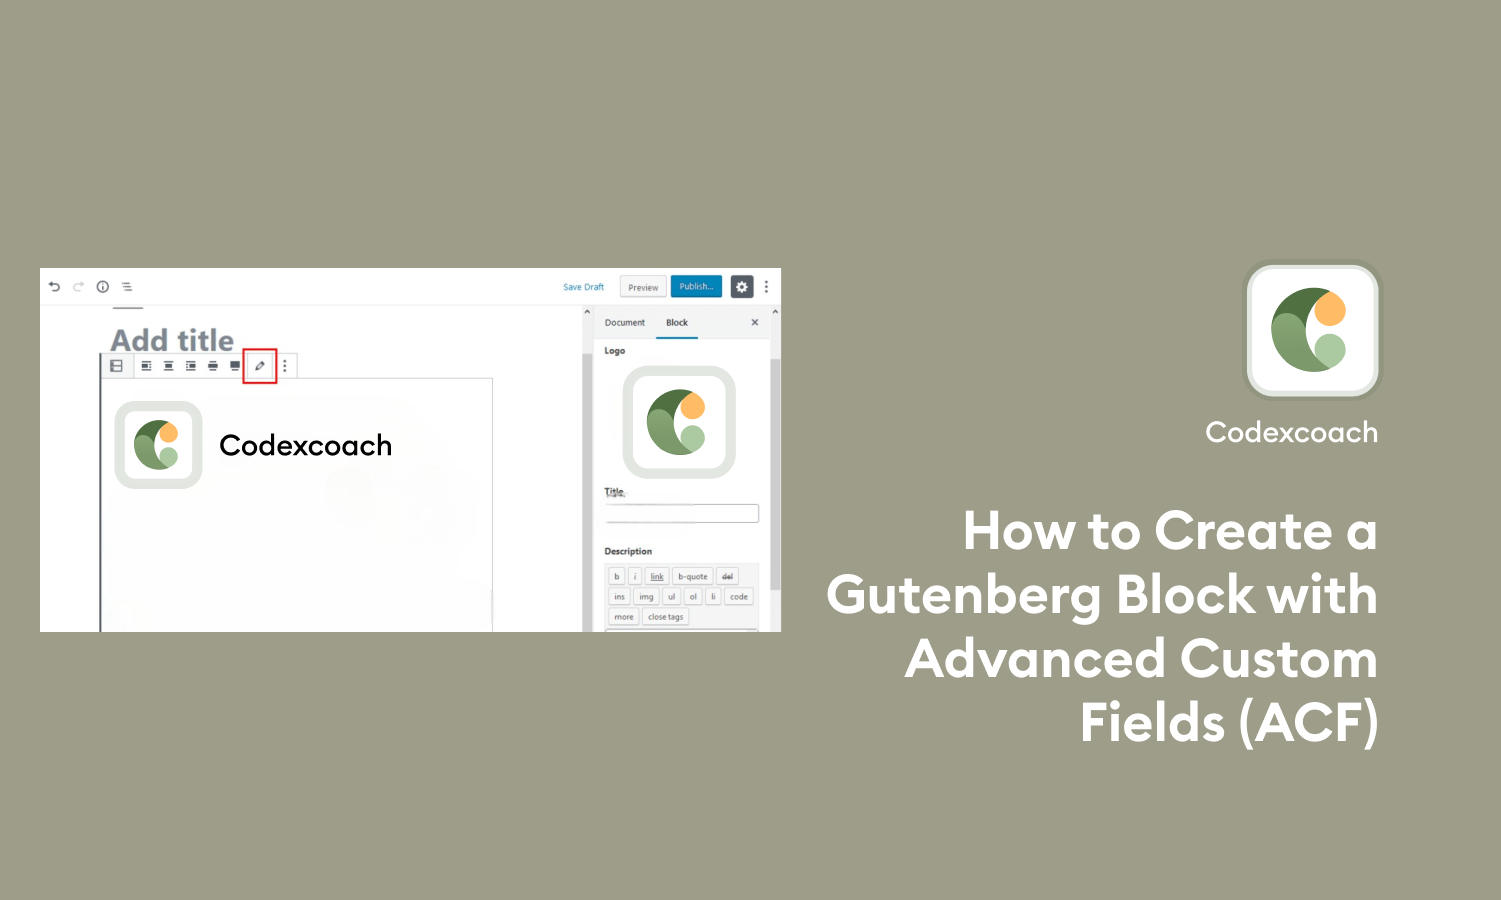 How to Create a Gutenberg Block with Advanced Custom Fields (ACF)